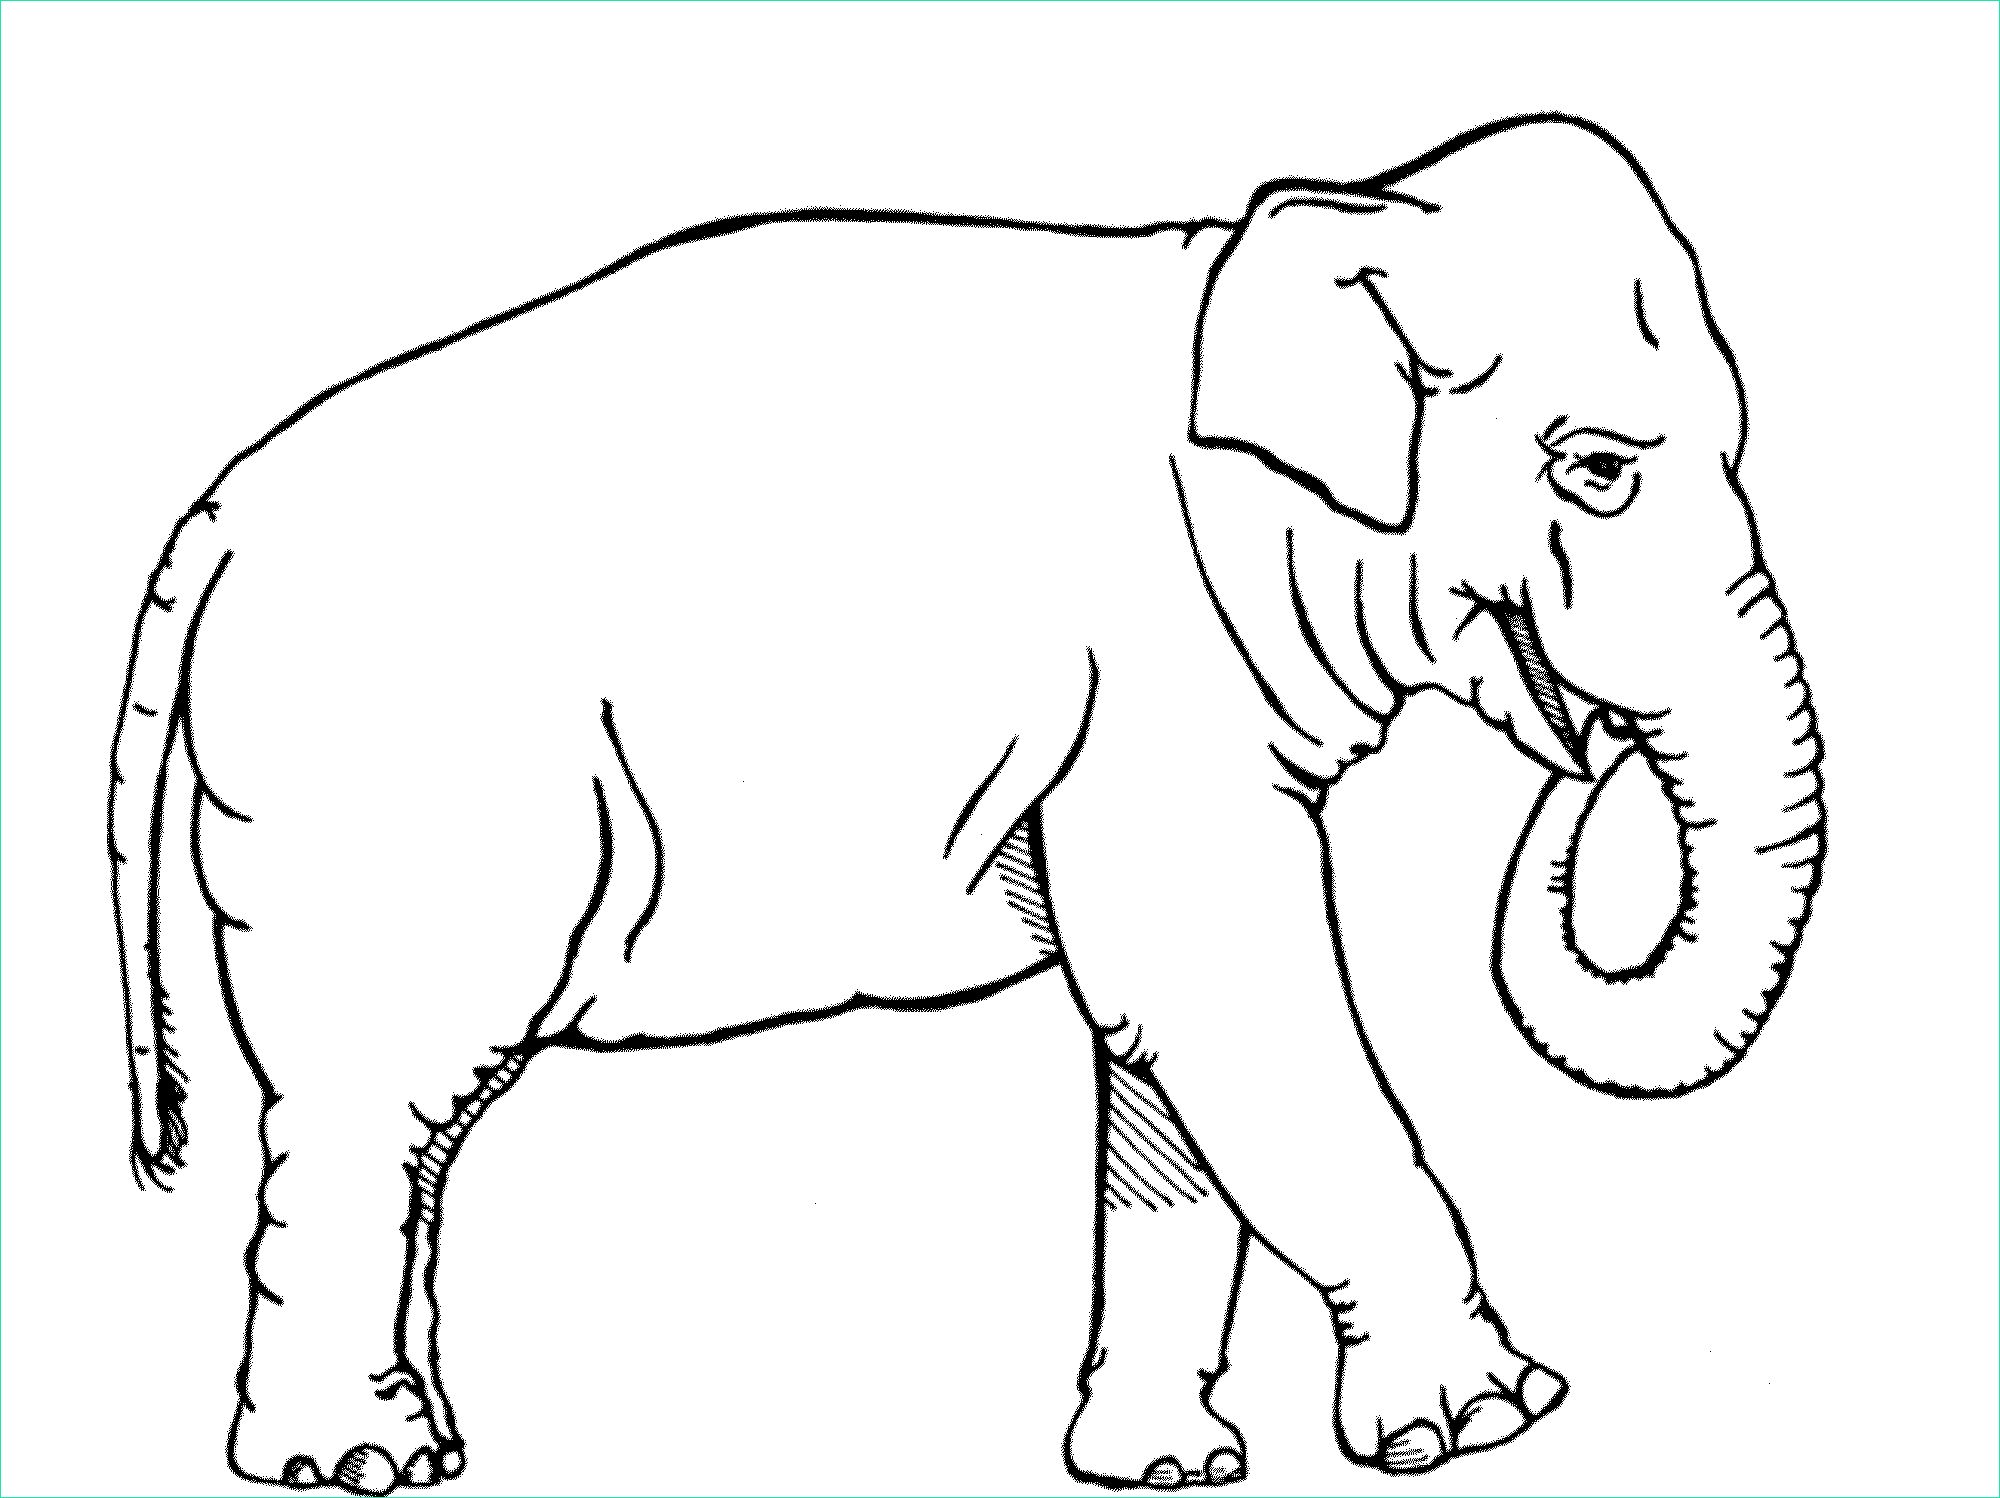 teaching kids elephant coloring pages